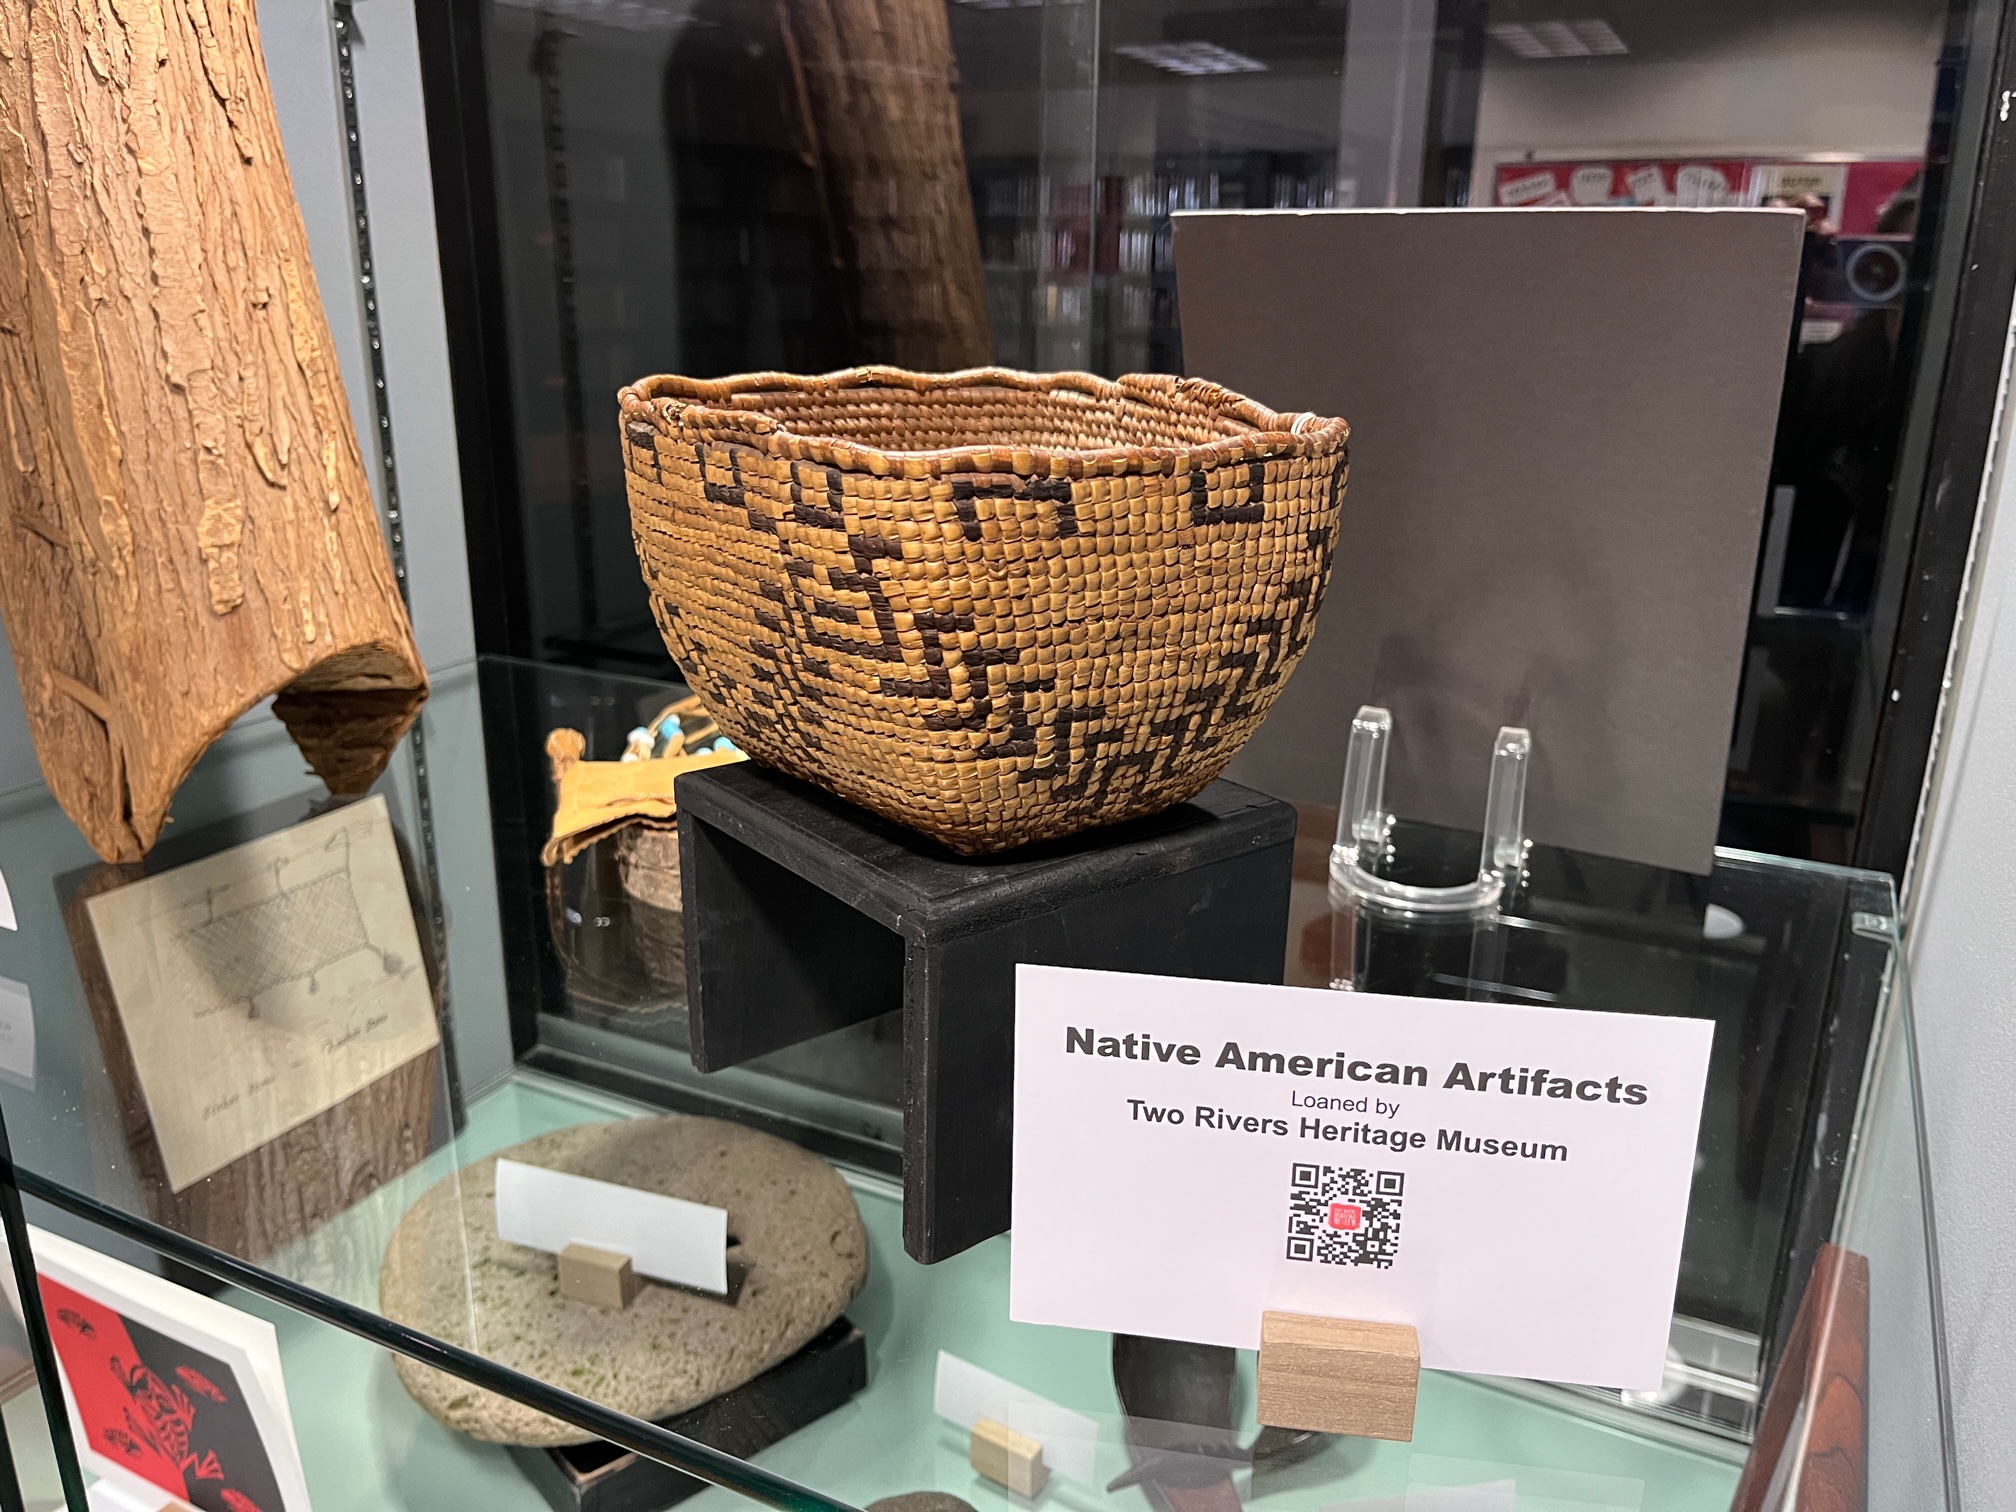 Display of loaned items from two rivers including woven basket